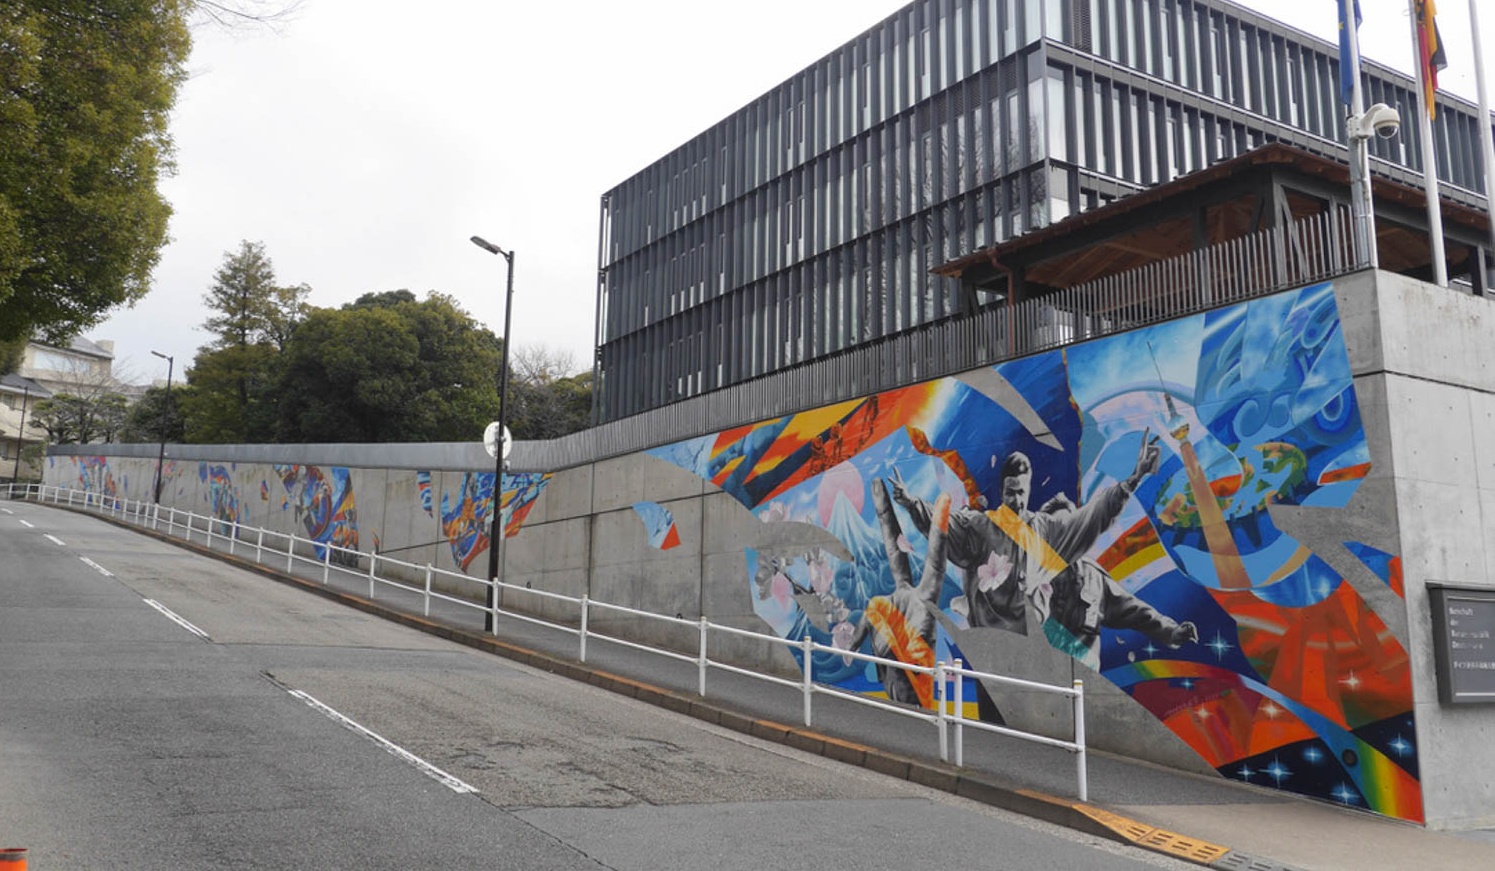 Mural Highlights Japan's Bond with Germany